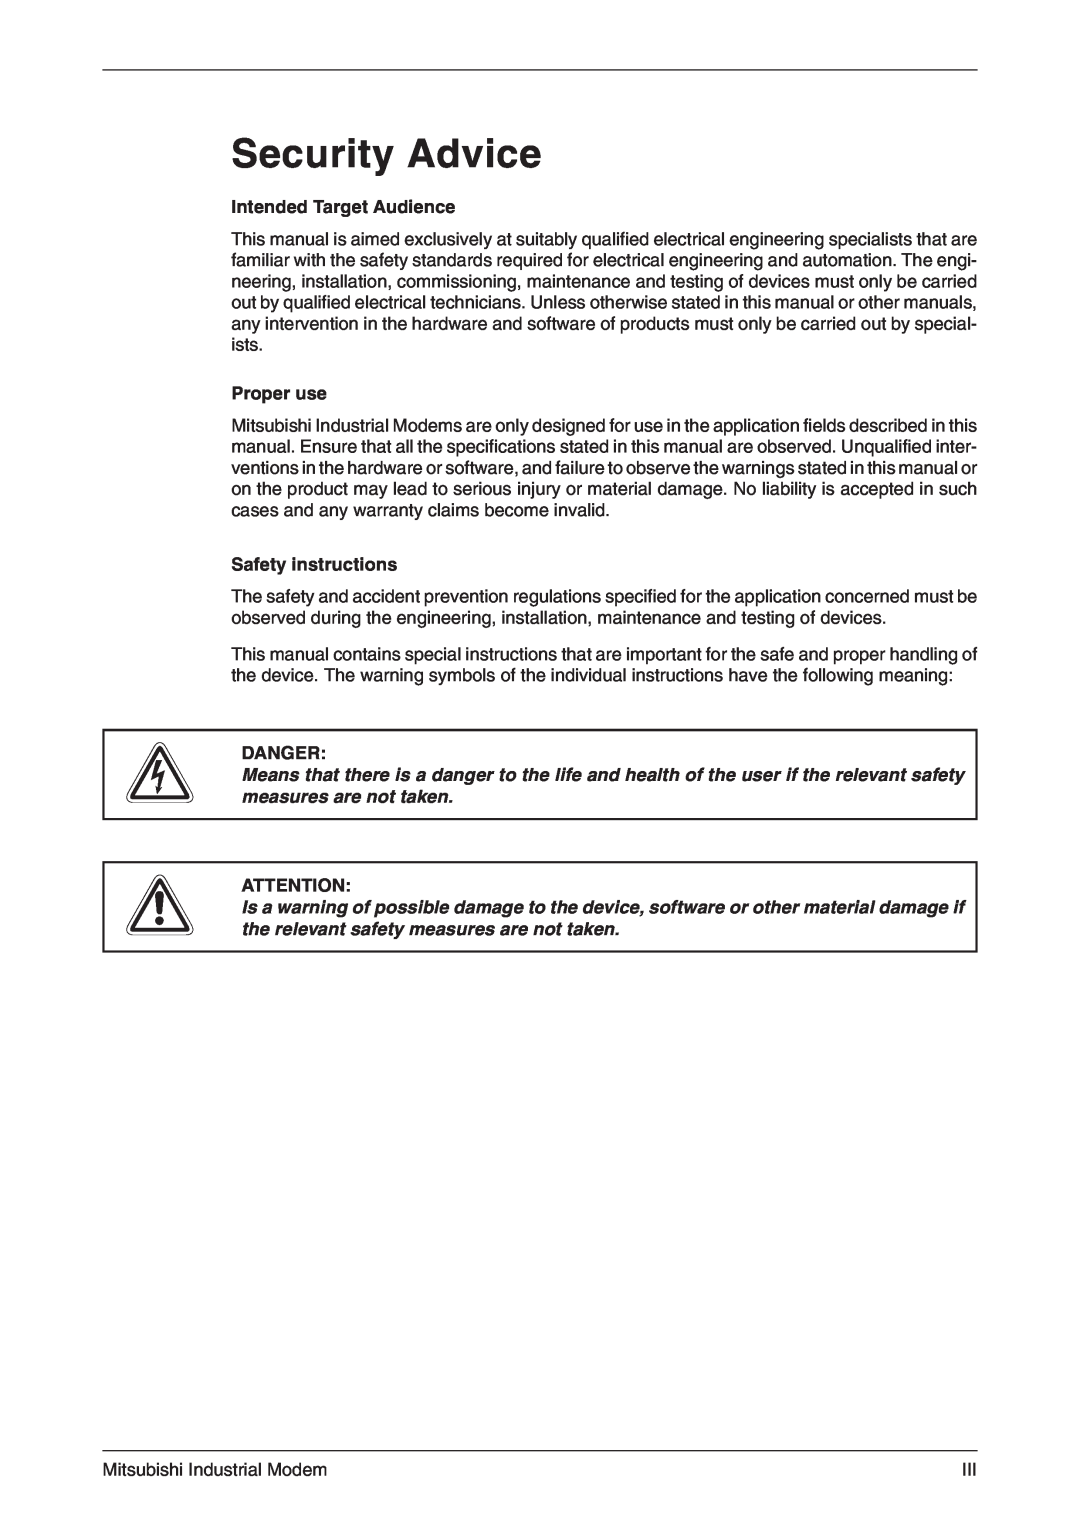 Mitsubishi Electronics MIM-G01 manual Security Advice, Intended Target Audience, Proper use, Safety instructions, P Danger 